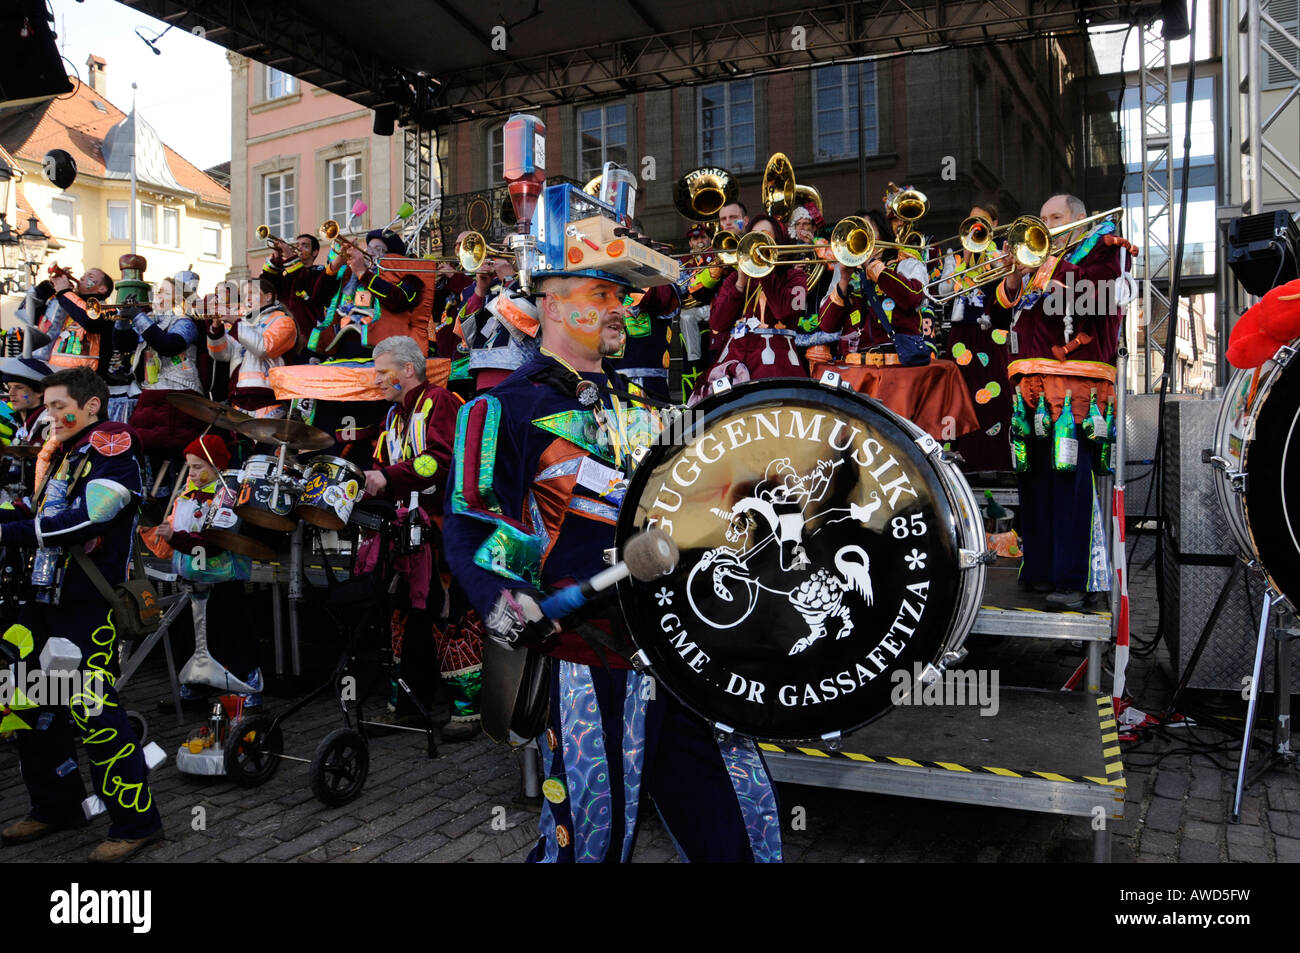 Gmendr Gassafetza Band, part of a procession of Gugge musicians at the 25th international meeting for Gugge music in Schwaebisc Stock Photo